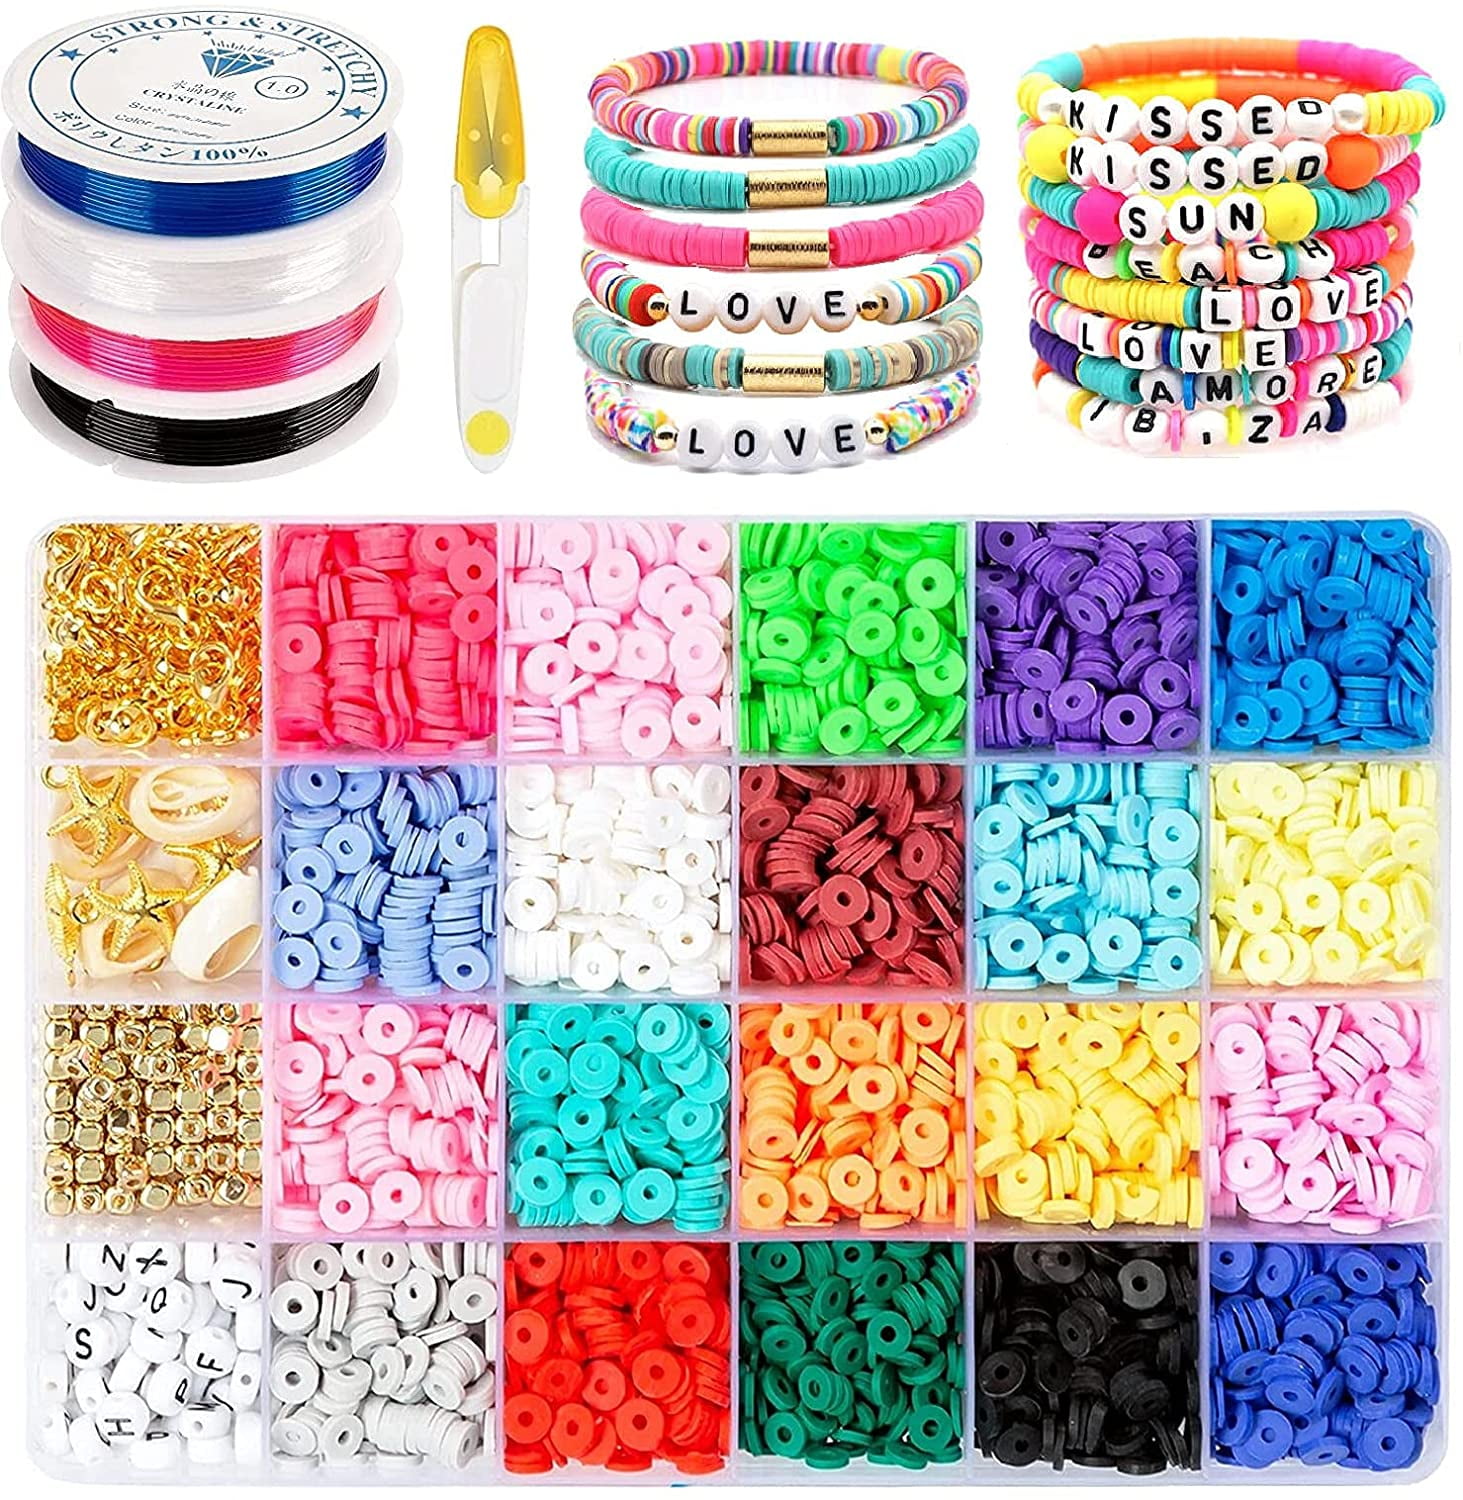  4200 Pieces Clay Beads White and Black Heishi Vinyl Beads for  Jewelry Making Polymer Clay Beads Flat Round Spacer Beads Handmade DIY  Craft Beads Bracelets Necklace Earring 6mm